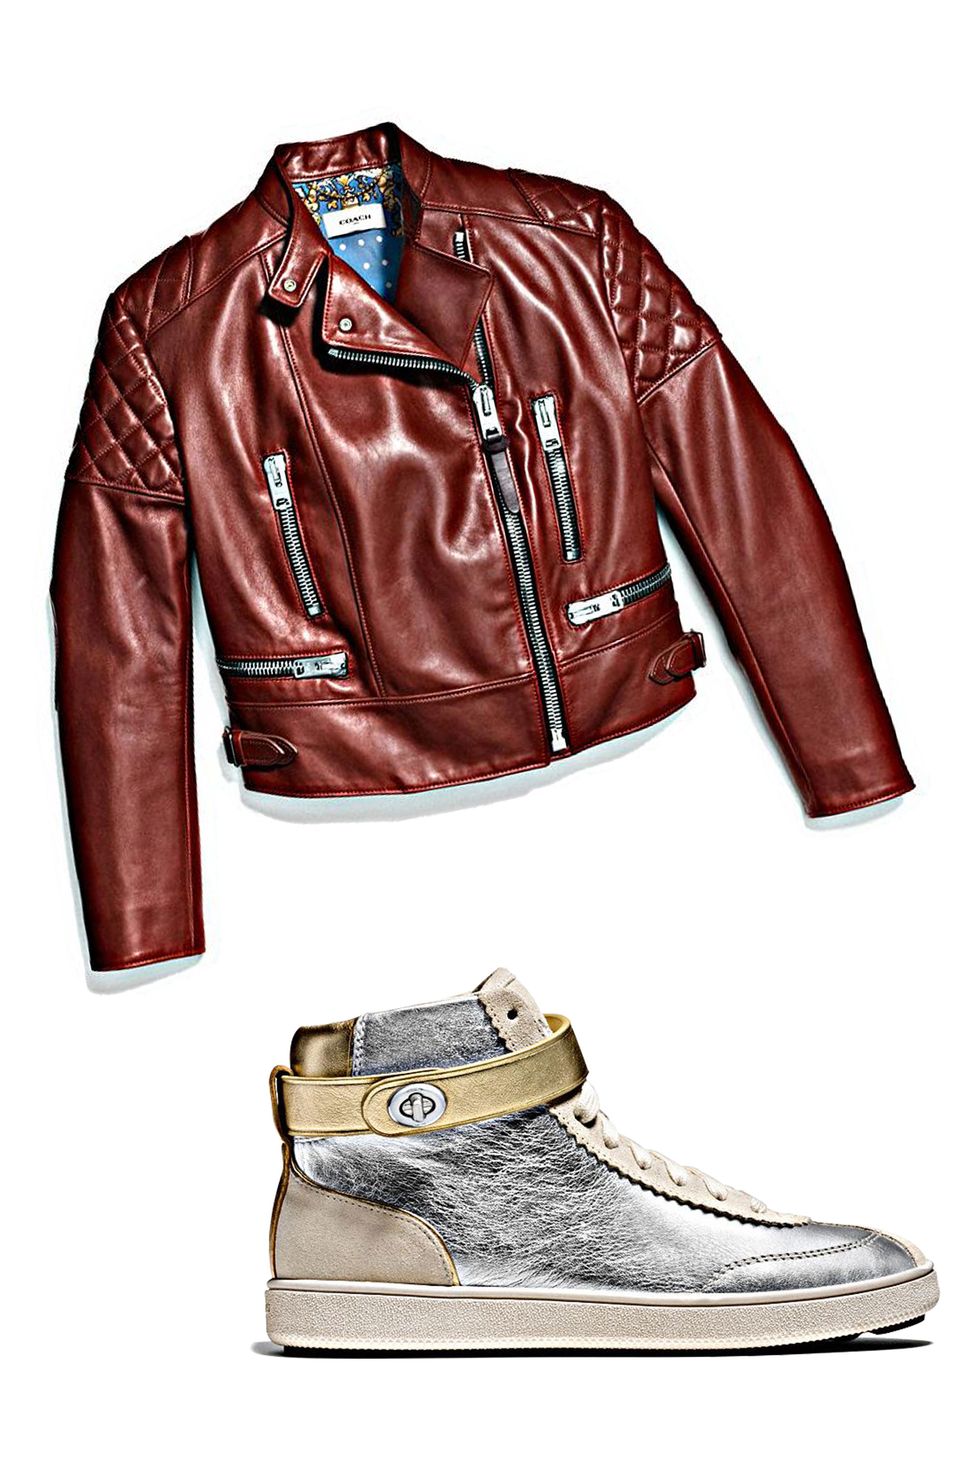 <p>Wearing a colored leather motorcycle jacket will never <em data-redactor-tag="em">not</em> feel like paying homage to '80s-era pop—but ground your look firmly in the 21st-century by pairing the iconic leather piece with sleek metallic high-tops. This pair is one of our fall favorites—the luxe turnlock closure is a nice finishing touch.
</p><p><br>
</p><p><em data-redactor-tag="em">Coach 1941 Icon Leather Biker Jacket, $1495, <a rel="noskim" href="http://www.coach.com/coach-designer-winter-jackets-icon-leather-biker-jacket/56842.html?CID=D_B_HBZ_11847" target="_blank">coach.com</a>; Coach 1941 C213 High Top Sneaker, $350, <a rel="noskim" href="http://www.coach.com/coach-designer-sneakers-c213-high-top-sneaker/Q8922.html?CID=D_B_HBZ_11848" target="_blank">coach.com</a></em><span class="redactor-invisible-space" data-verified="redactor" data-redactor-tag="span" data-redactor-class="redactor-invisible-space"><em data-redactor-tag="em"></em></span><br></p>